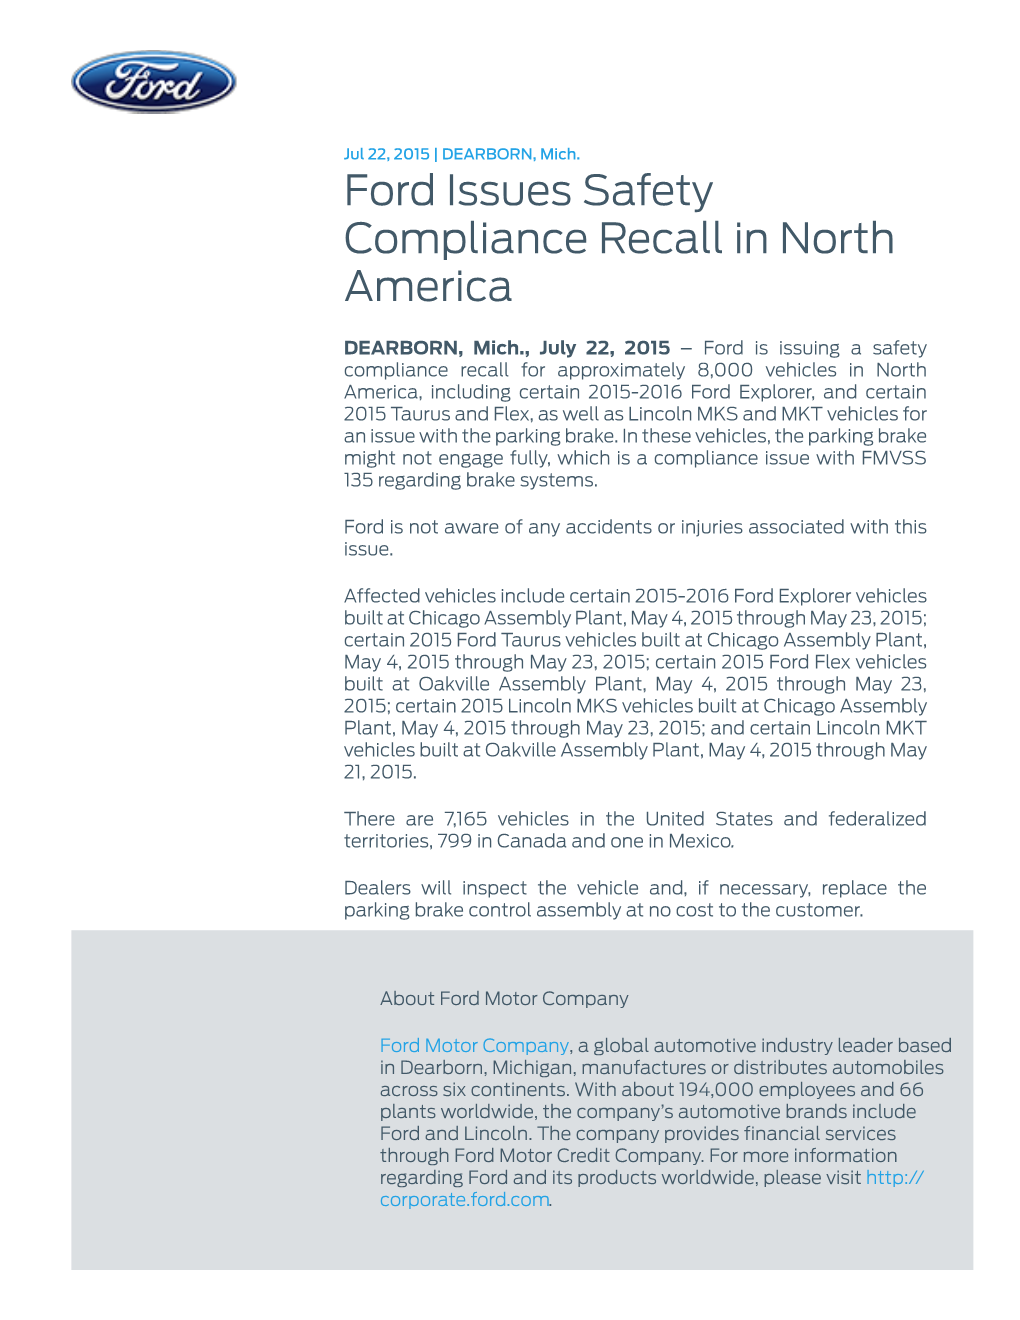 Ford Issues Safety Compliance Recall in North America